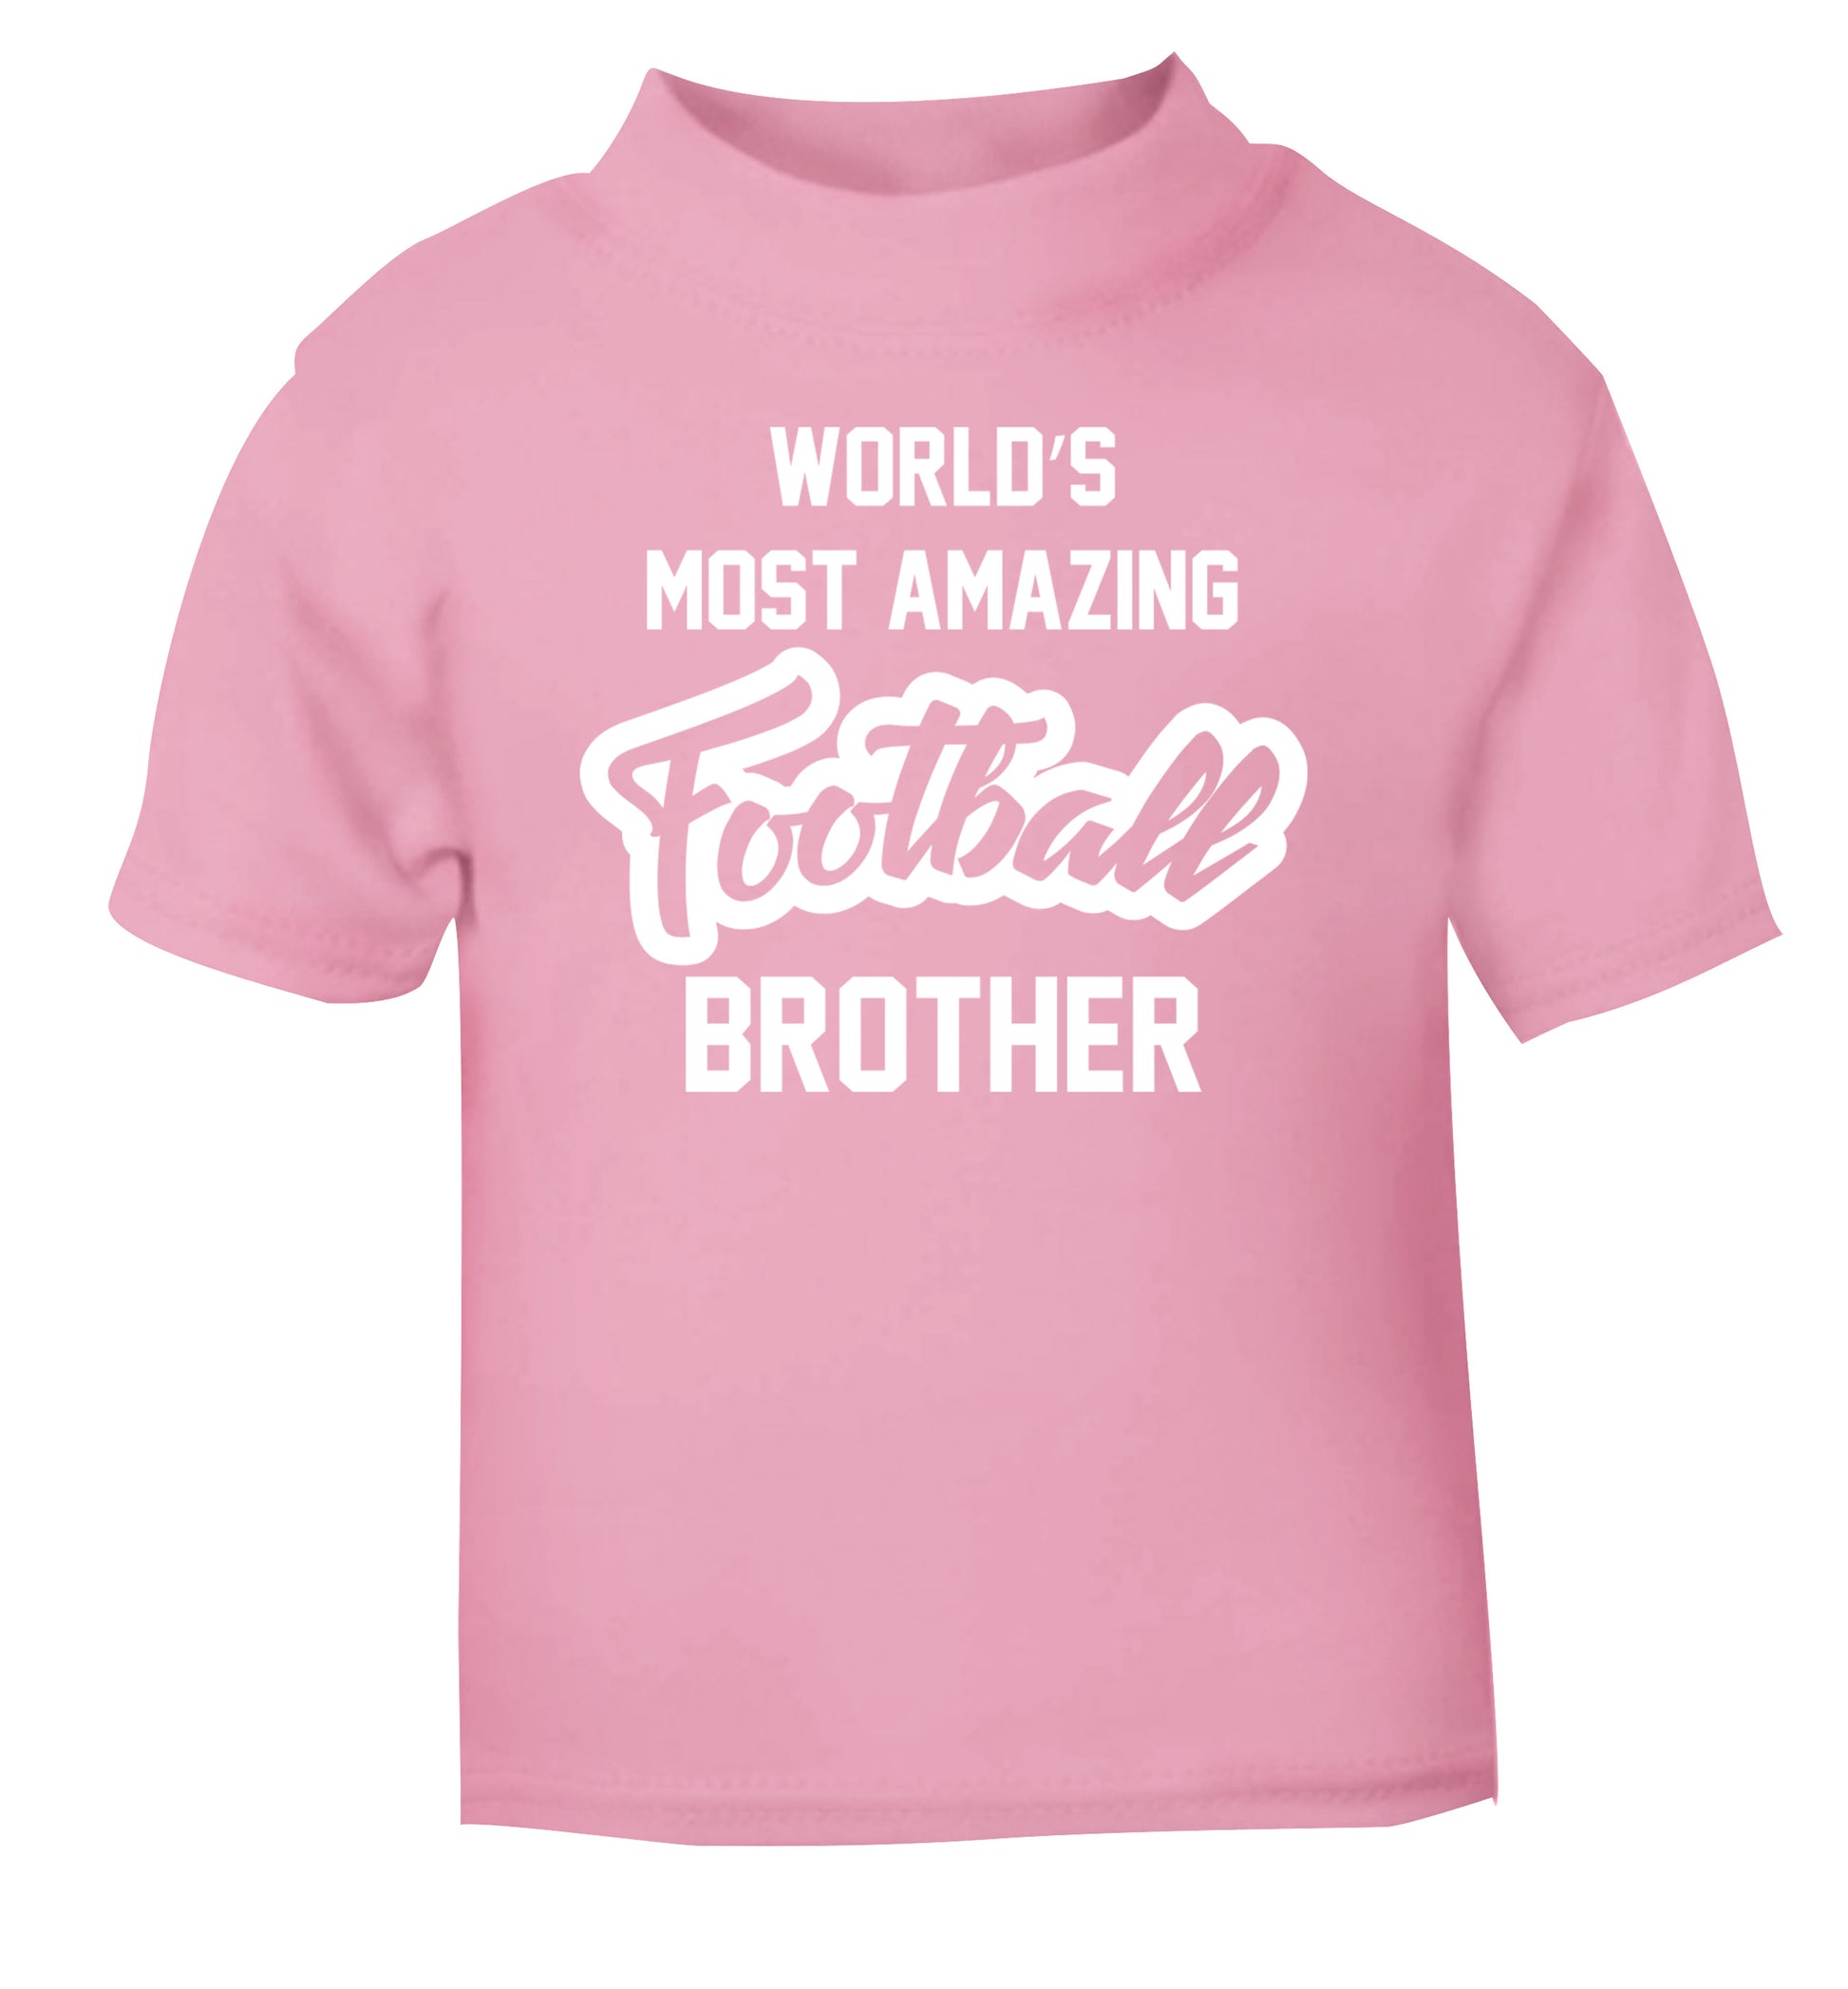 Worlds most amazing football brother light pink Baby Toddler Tshirt 2 Years